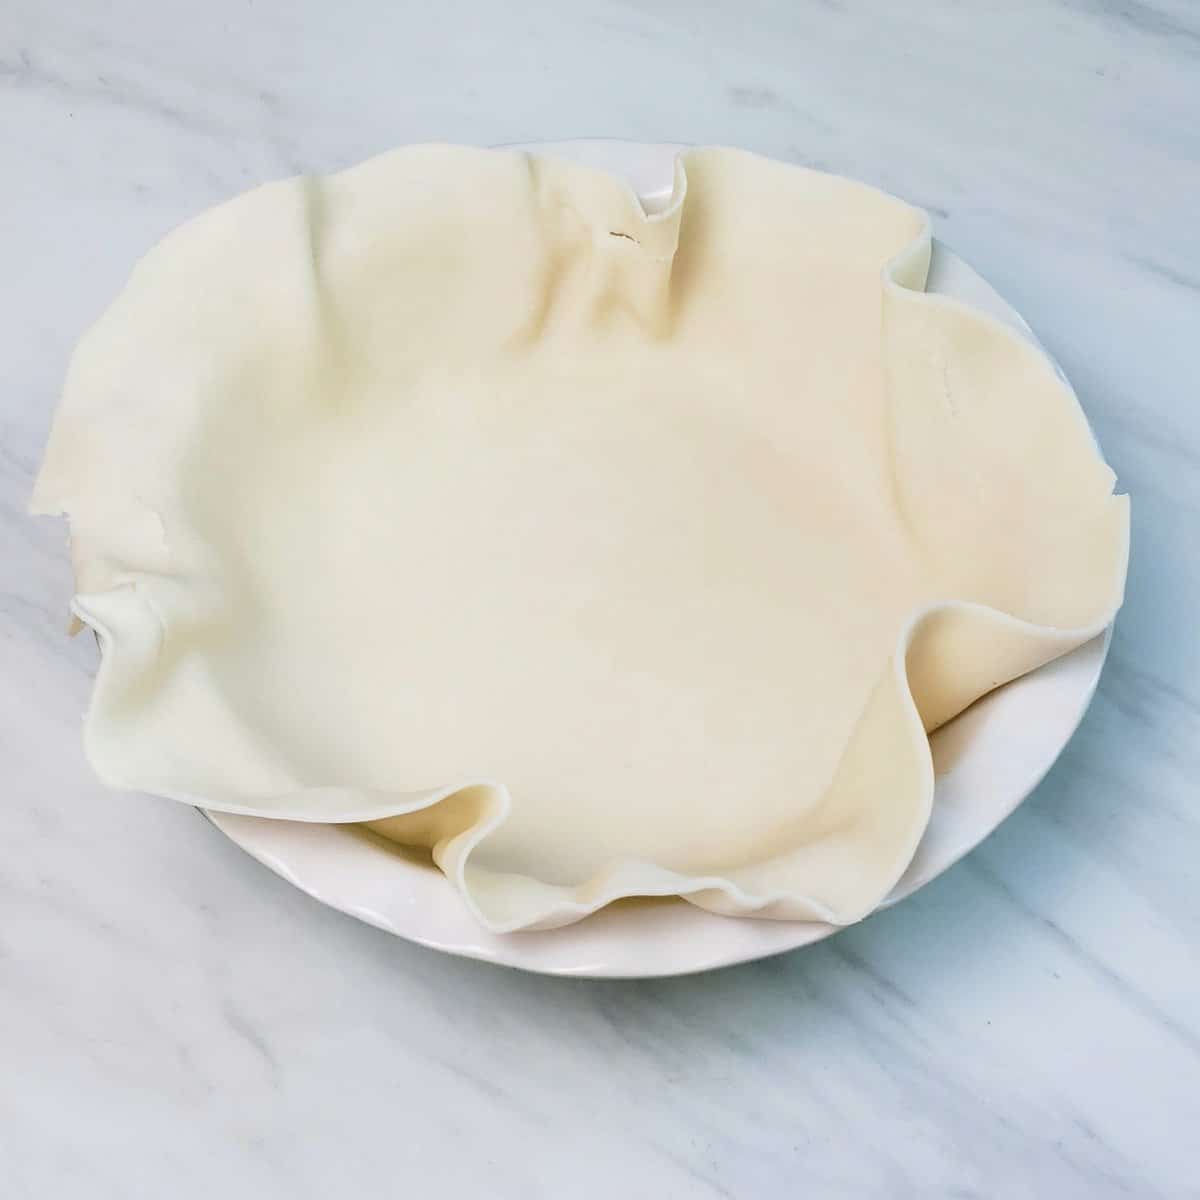 Pillsbury pie crust unrolled and laid in a white pie dish on marble surface